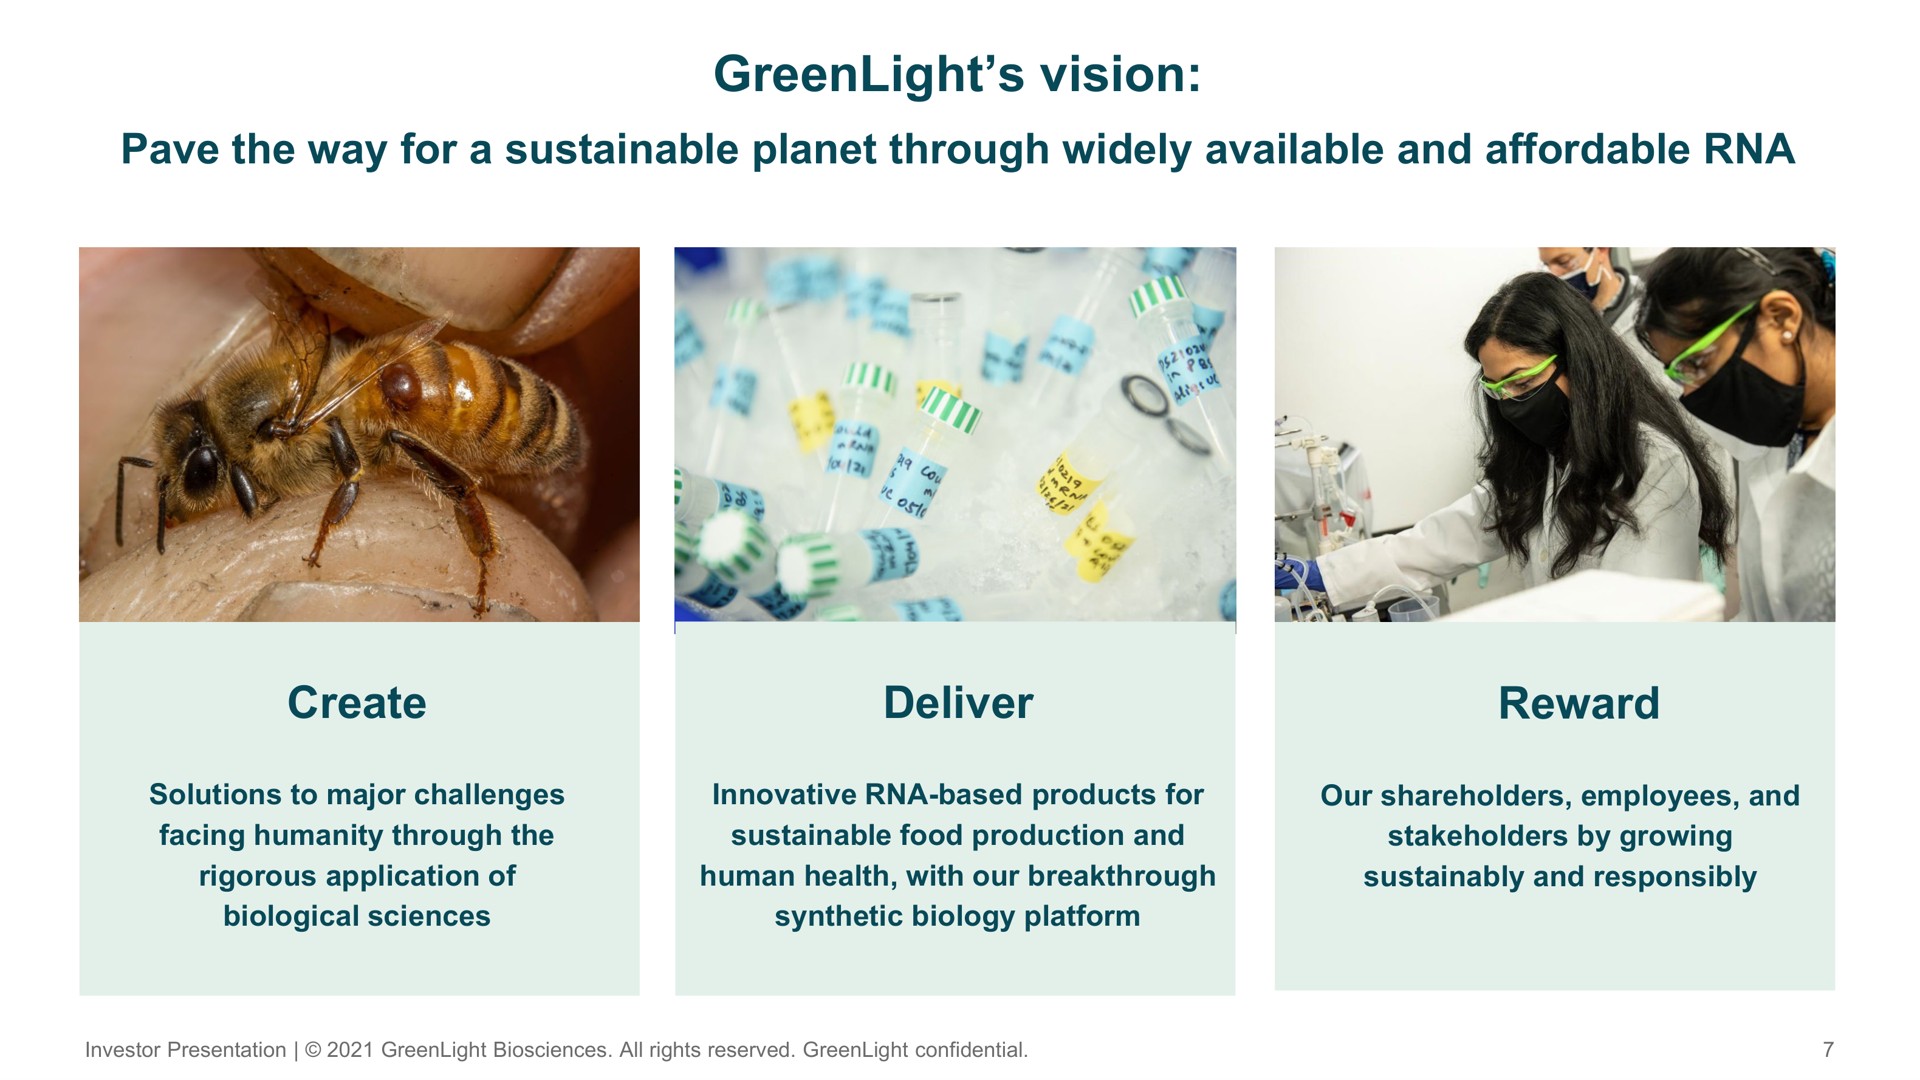 pave the way for a sustainable planet through widely available and affordable vision create deliver reward | GreenLight